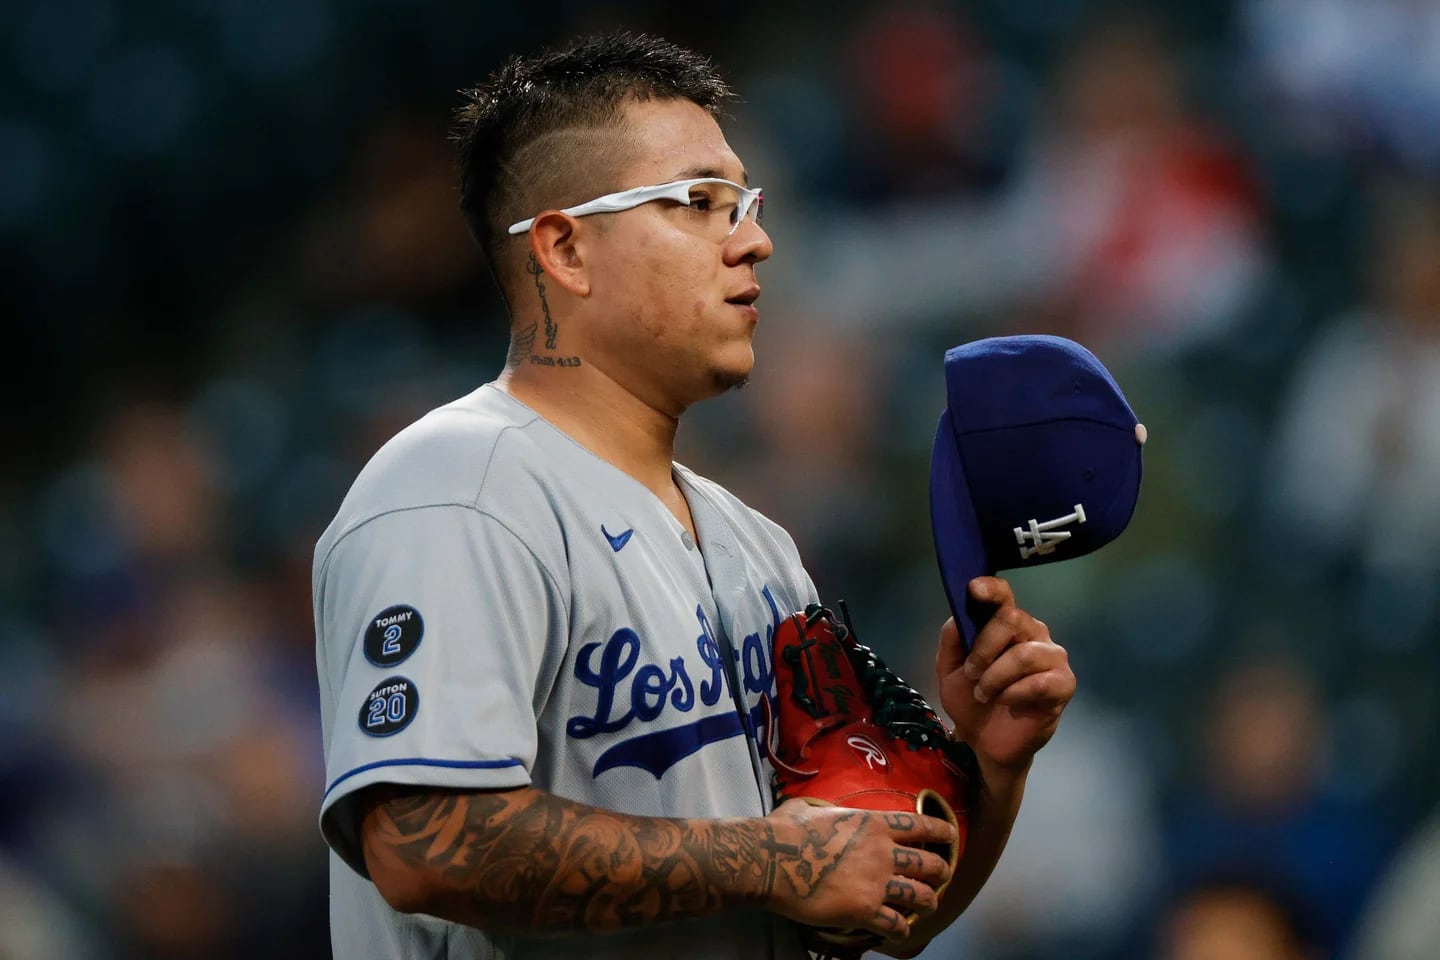 It was so dope to draw this portrait of Julio Urias with tattoos